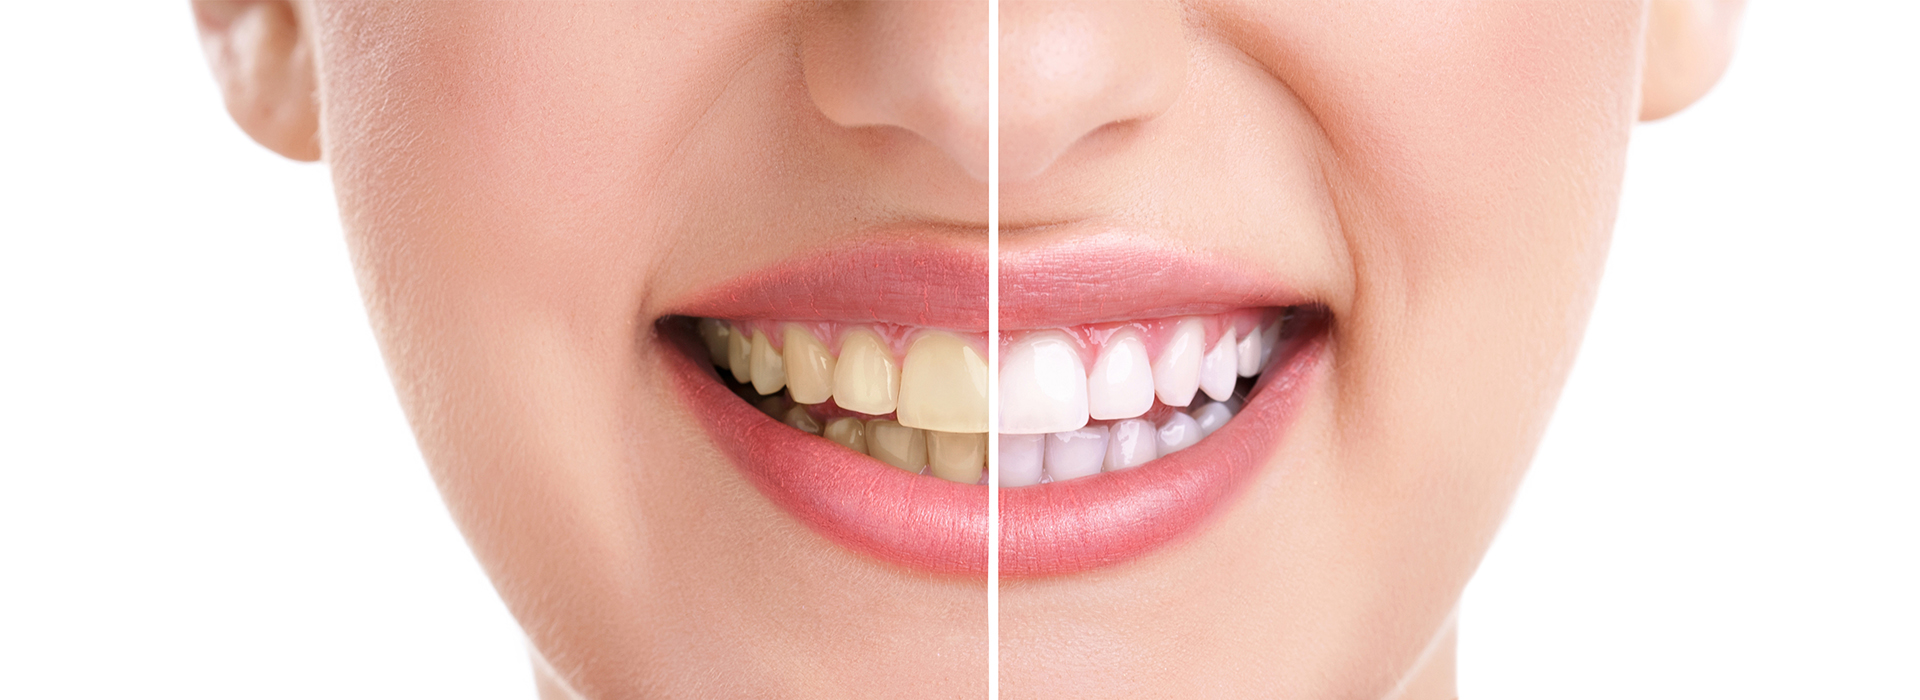 The image is a close-up of a person s face, showcasing their teeth before and after a dental procedure, with the  before  side on the left and the  after  side on the right.